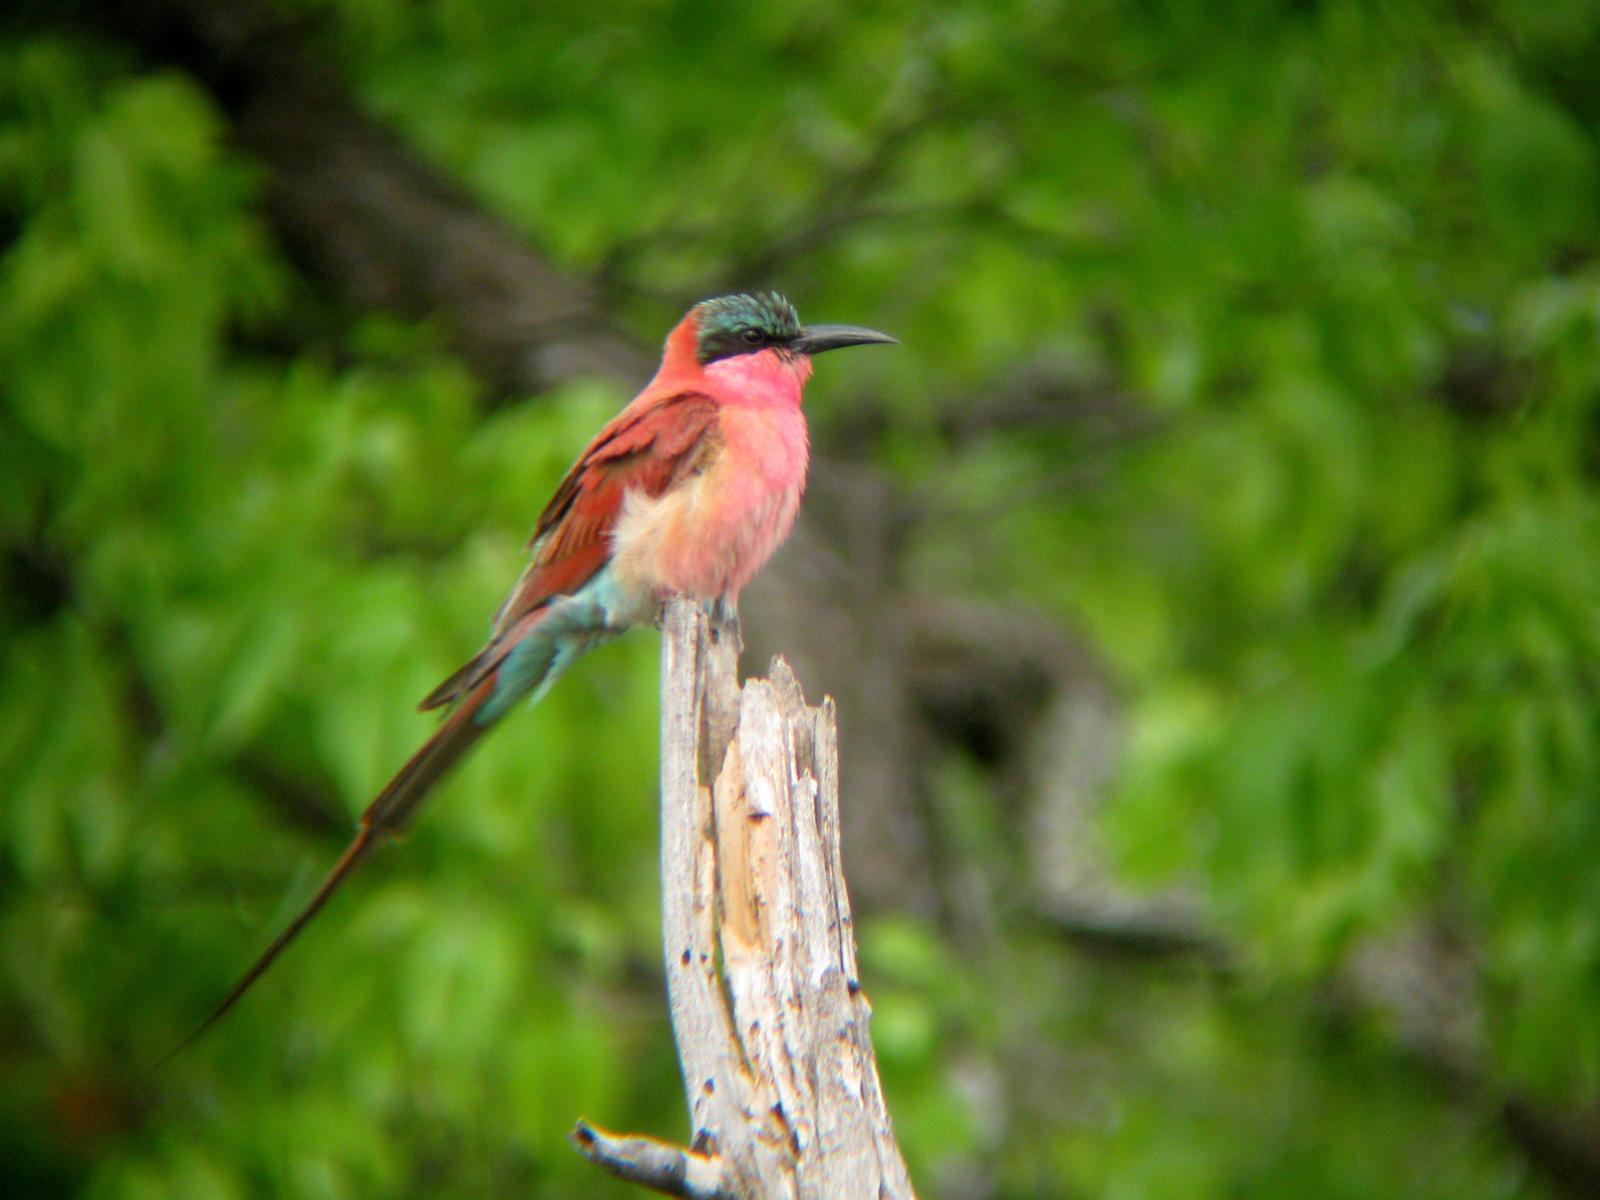 Southern Carmine Bee-eater Photo by Jeff Harding